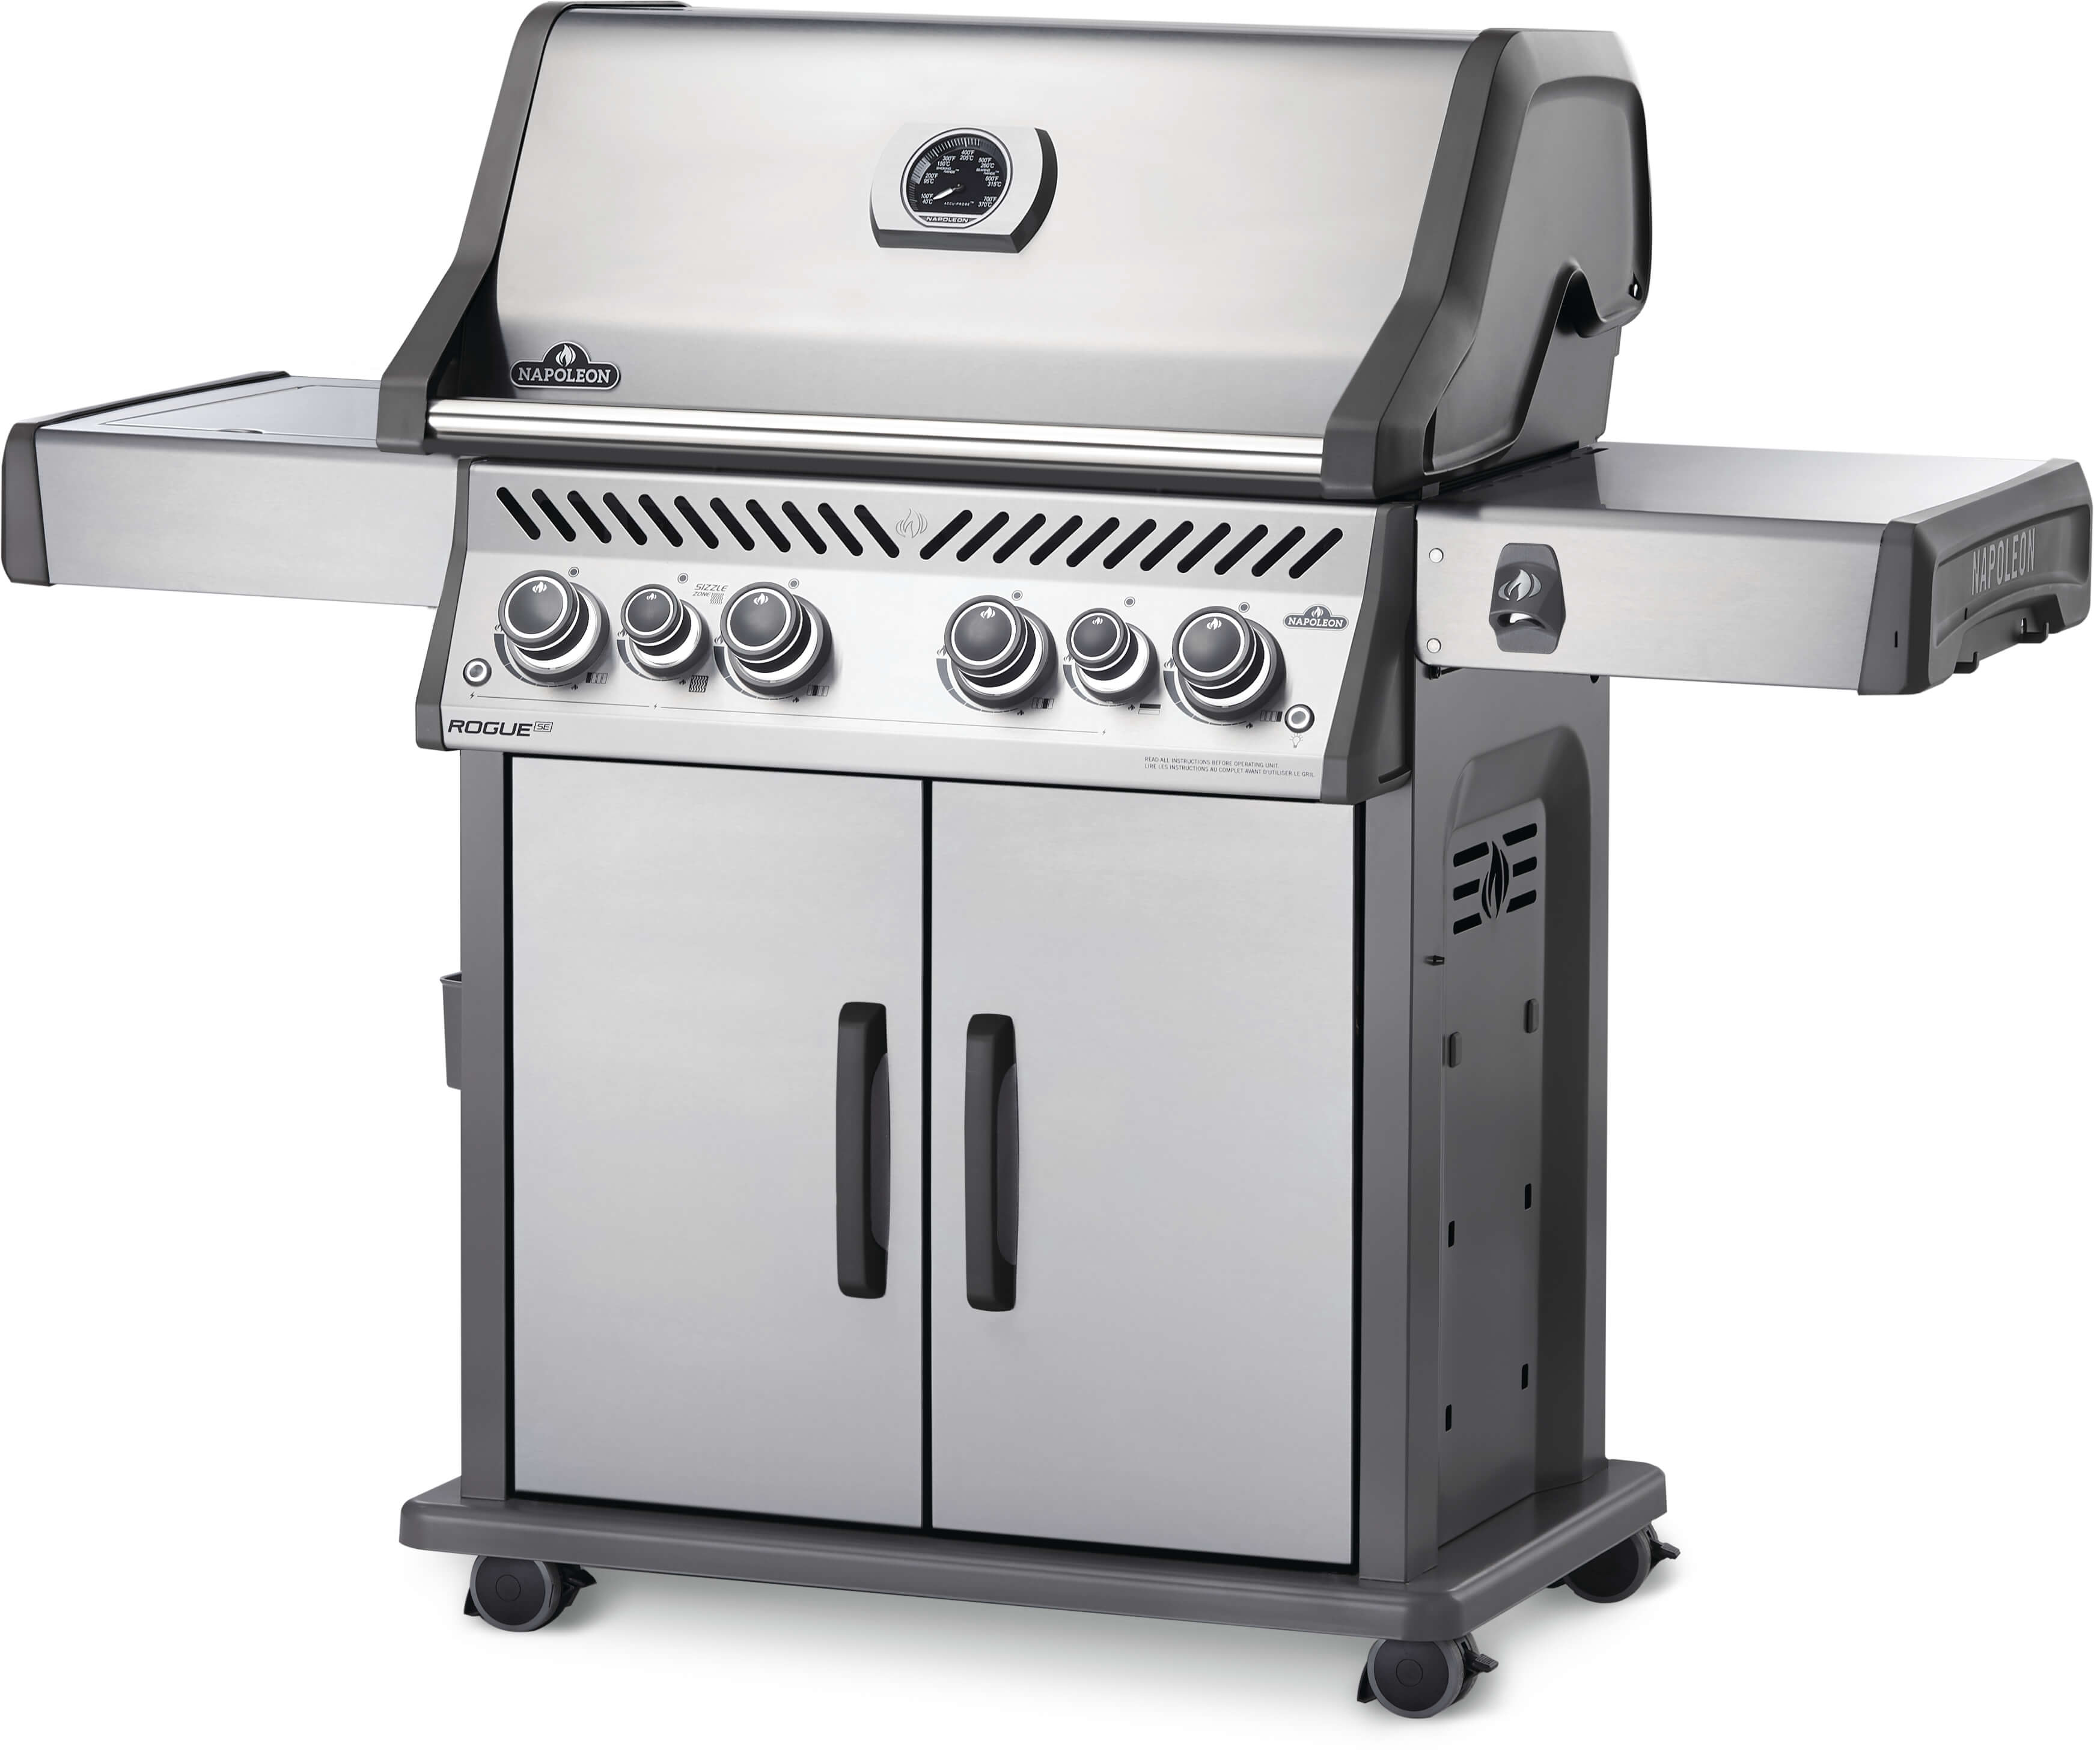 Rogue® SE 525 Natural Gas Grill with Infrared Rear and Side Burners, Stainless Steel - image 2 of 14